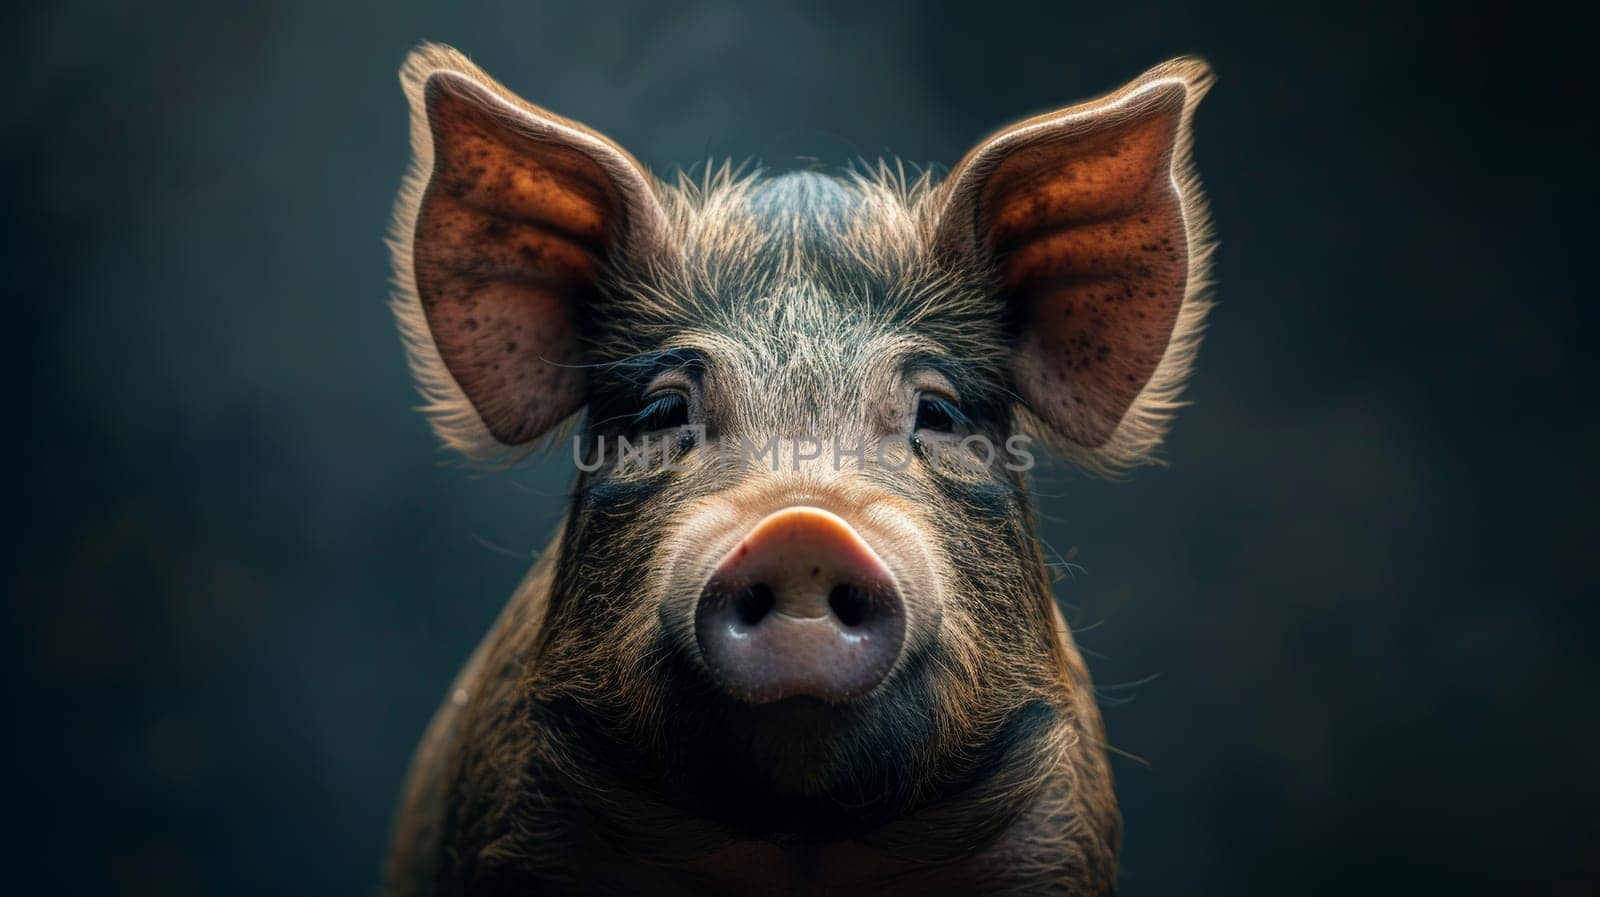 A close up of a pig with big ears and dark background